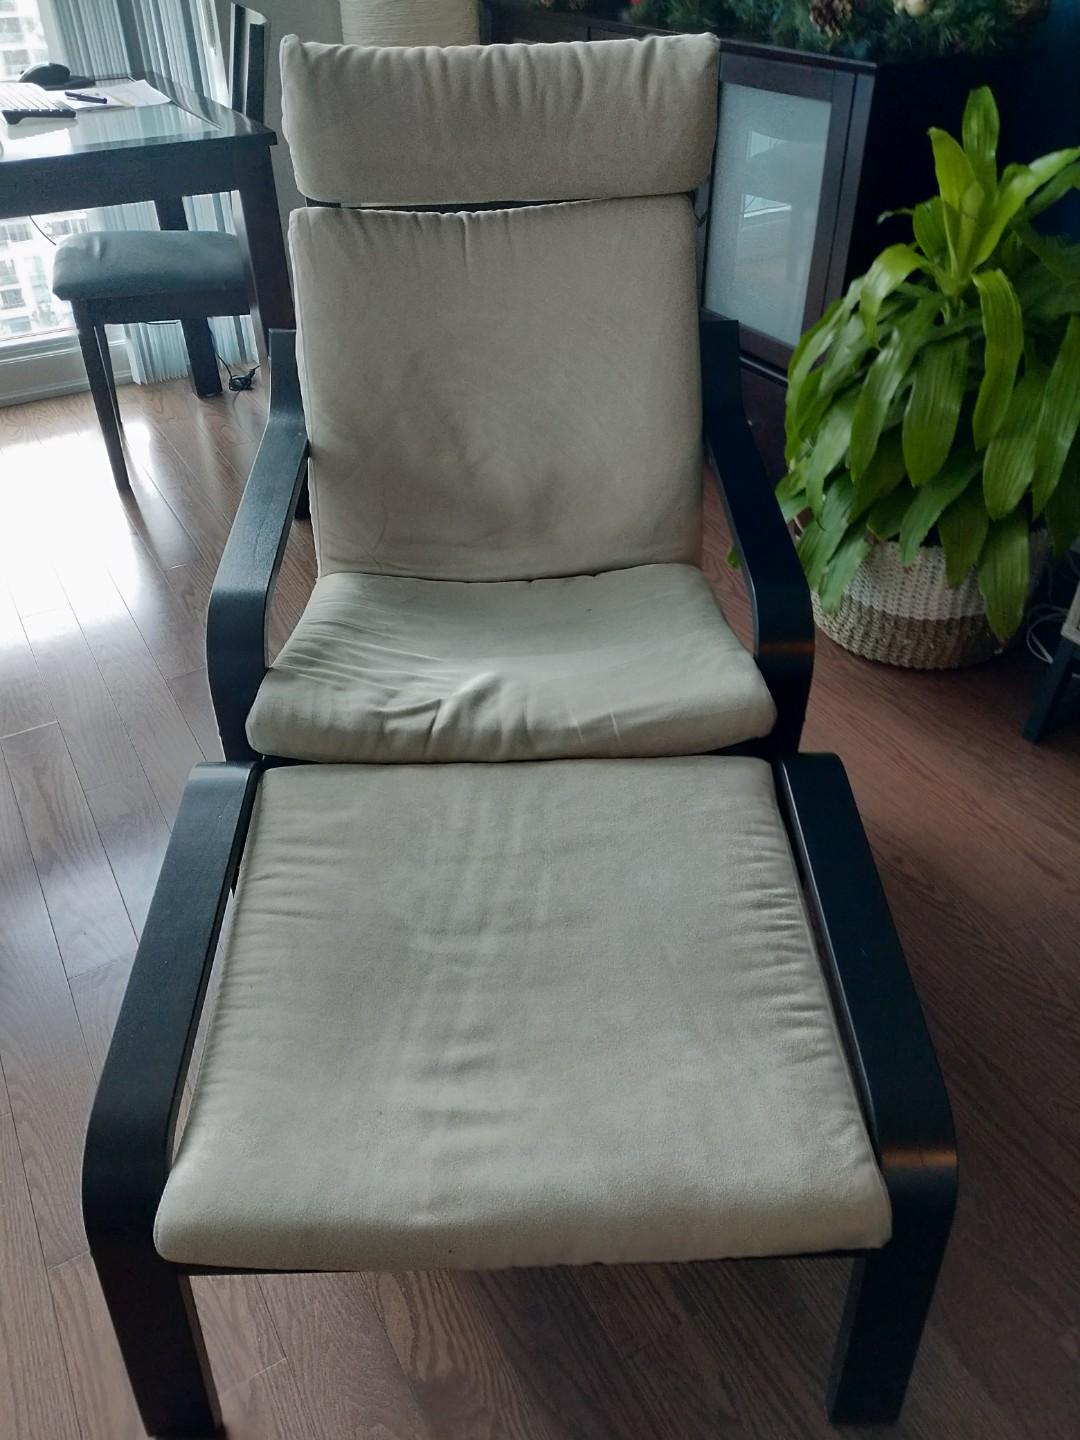 Ikea Poang Chair And Footrest Home Furniture On Carousell